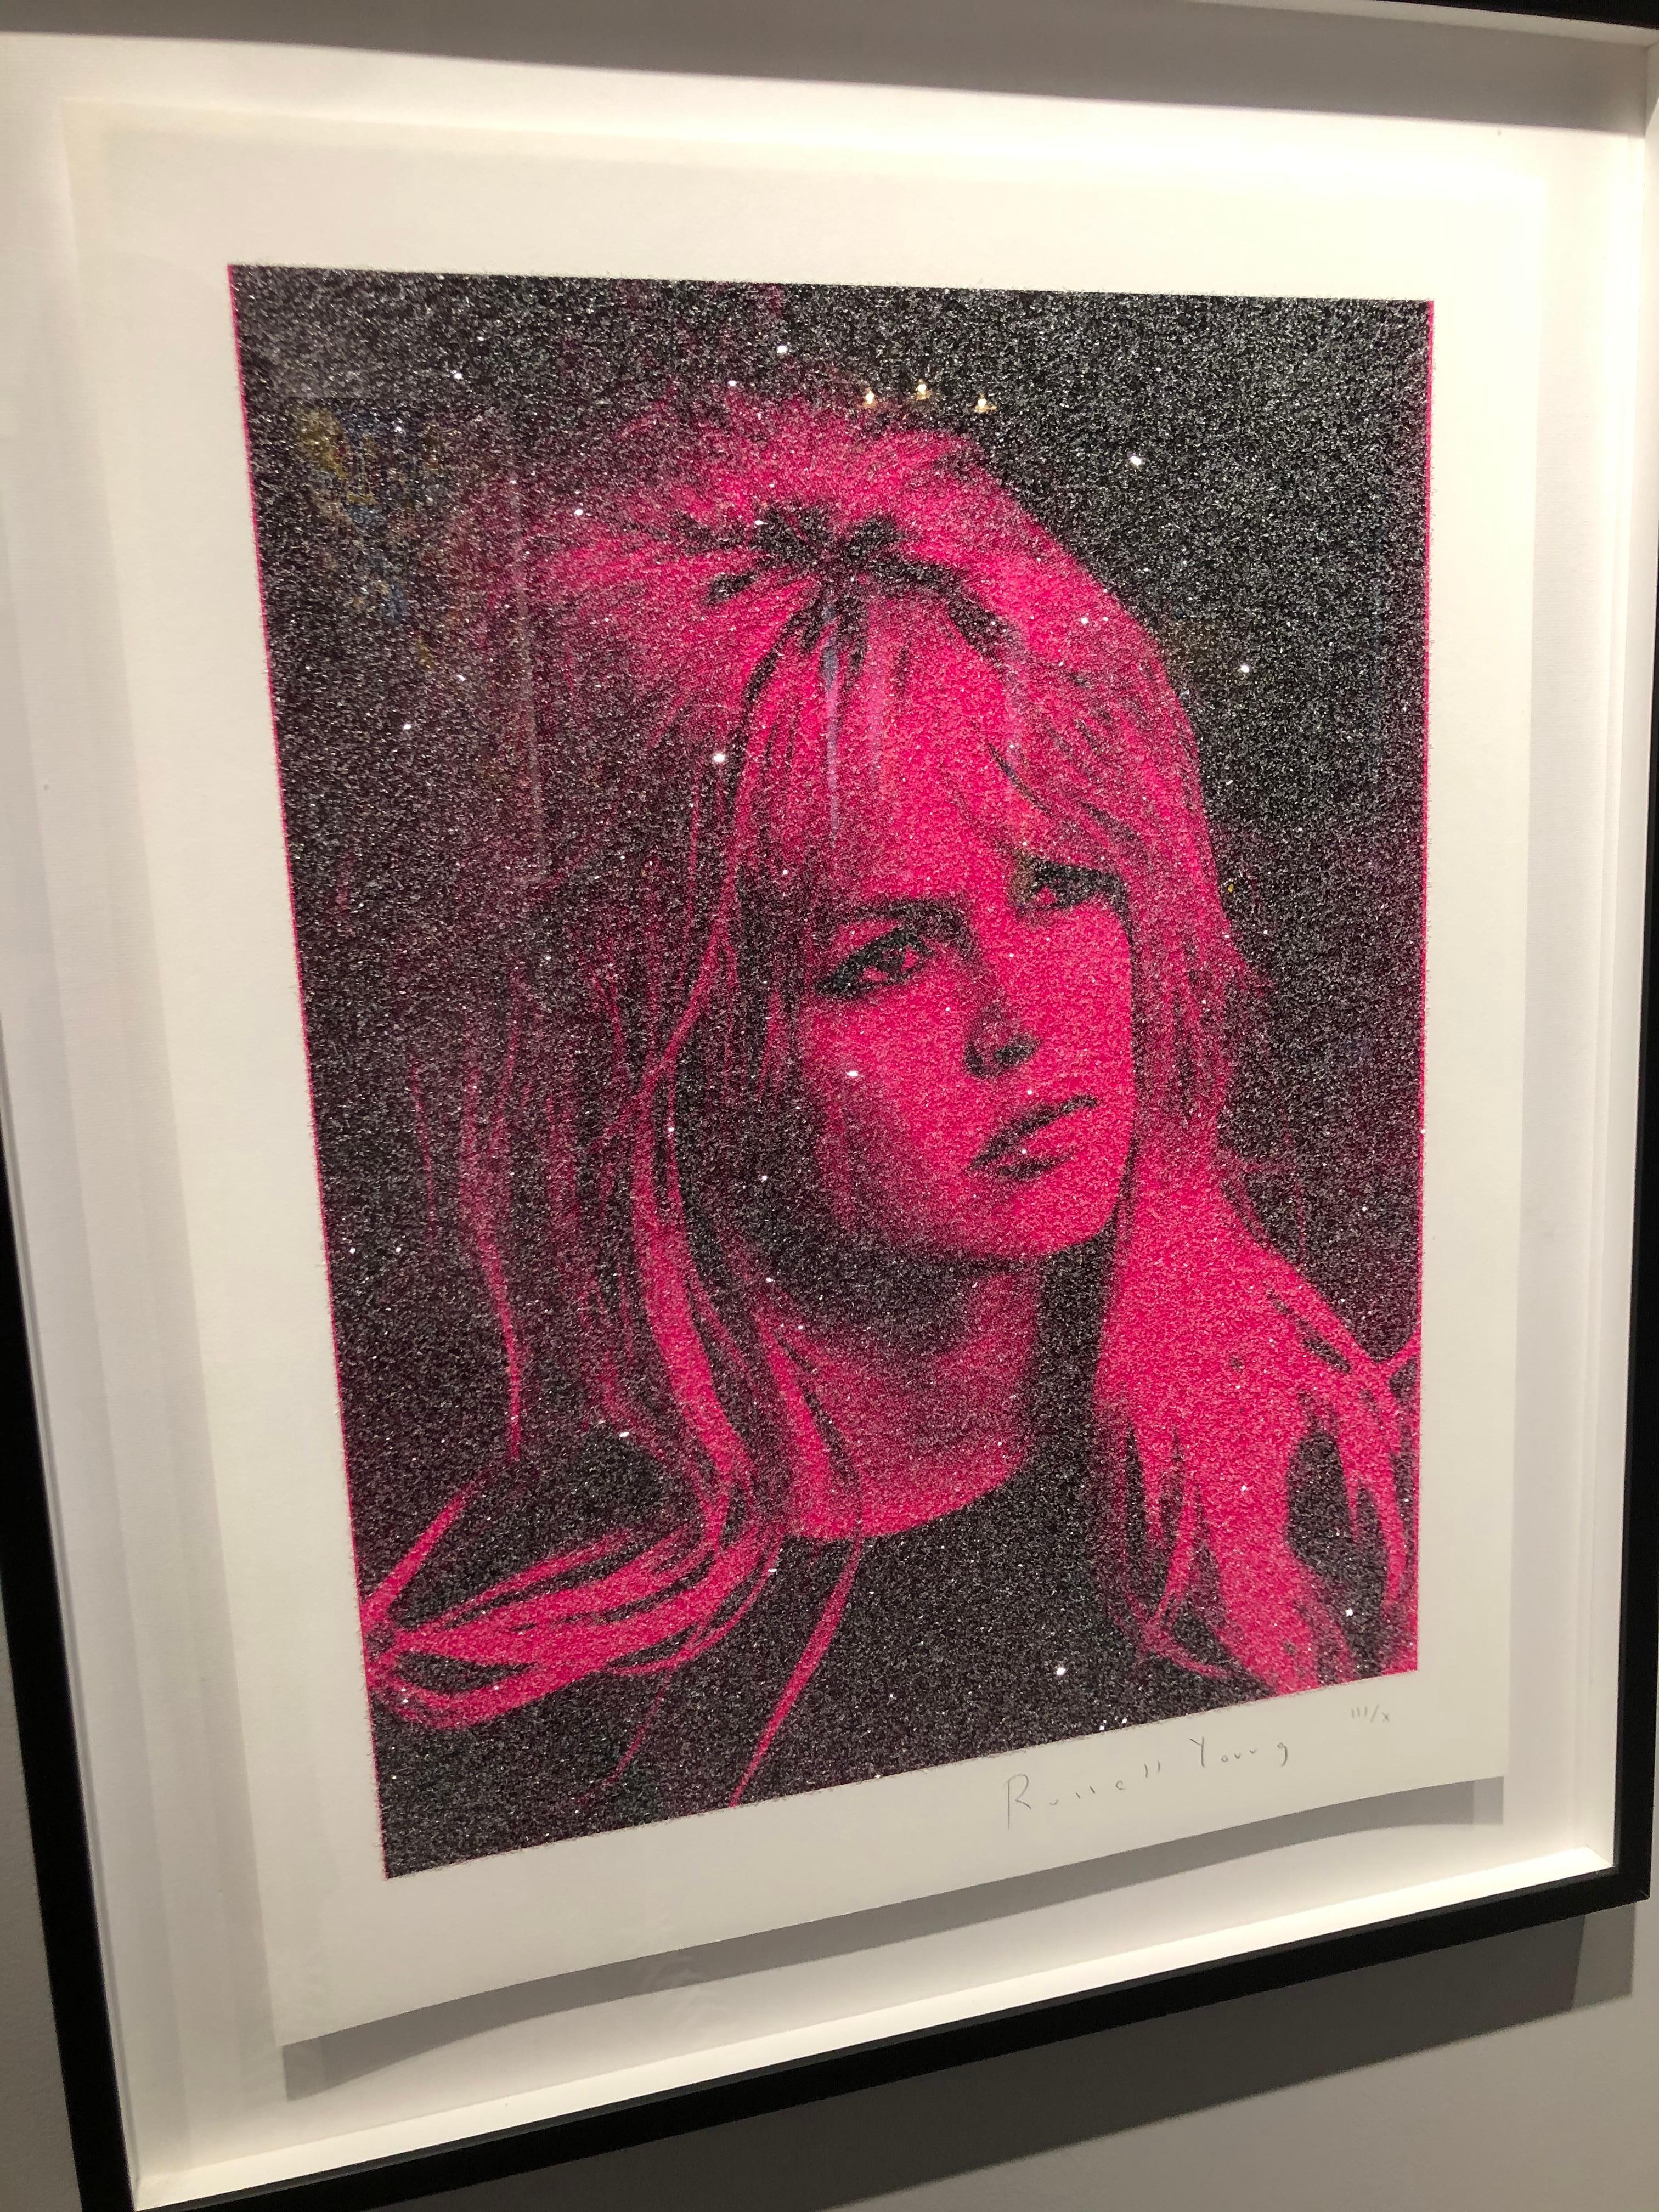 Bardot Femme Fatale 2017 , signed and numbered on the front - limited edition n. III/X
White wood frame and glass
About the artist :
Russell Young is a American-British Pop artist known for his large-scale silkscreen paintings of cultural icons. The